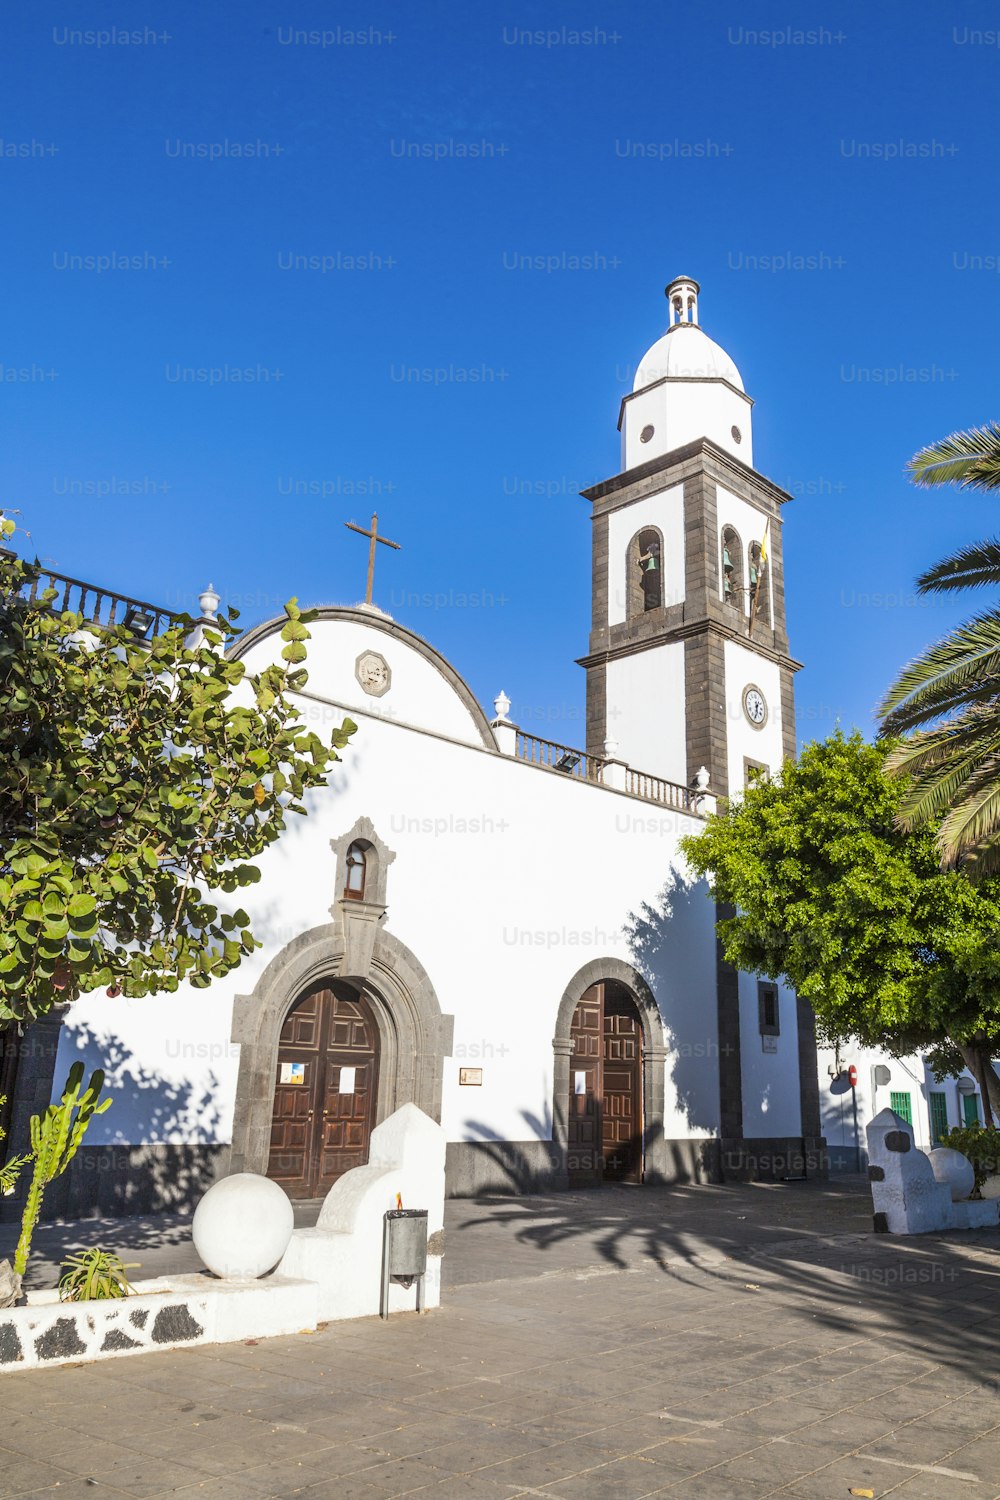 The beautiful church of San Gines in Arrecife with its white-washed exterior and attractive bell tower